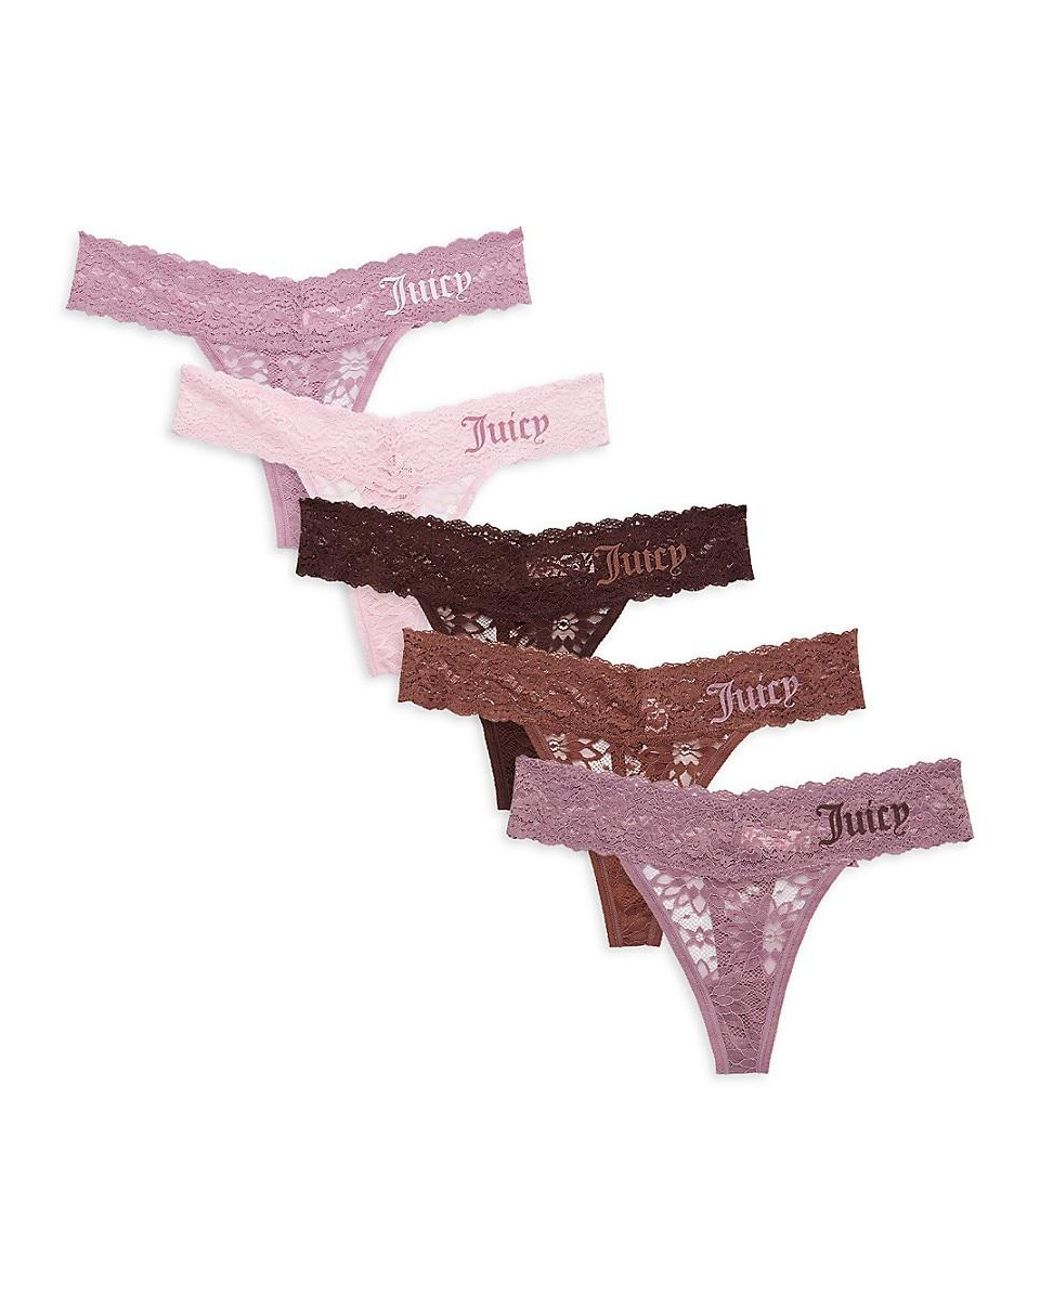 Juicy Couture 5-piece Lace Thong Briefs Set in Pink